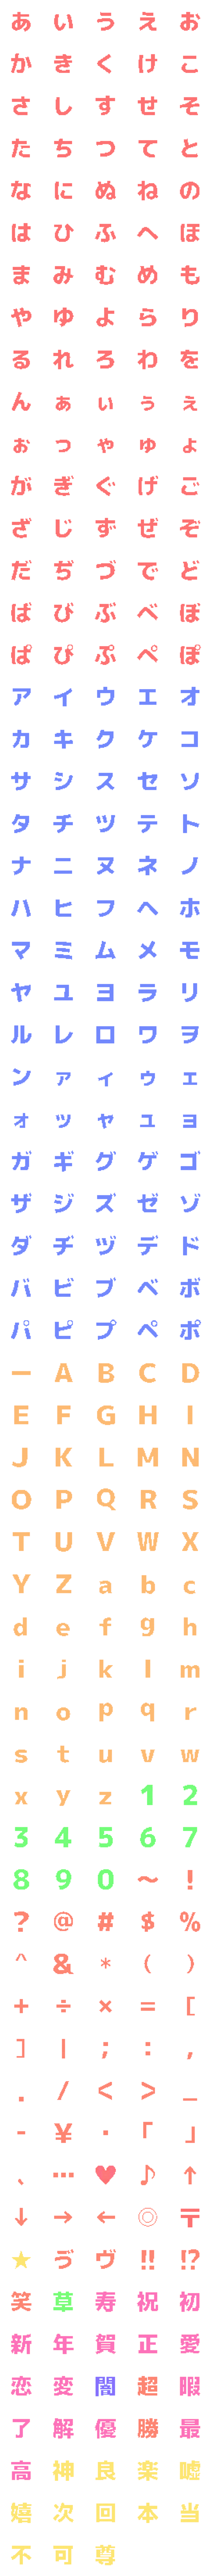 [LINE絵文字]LED風デコ文字 -ゴシック体-の画像一覧